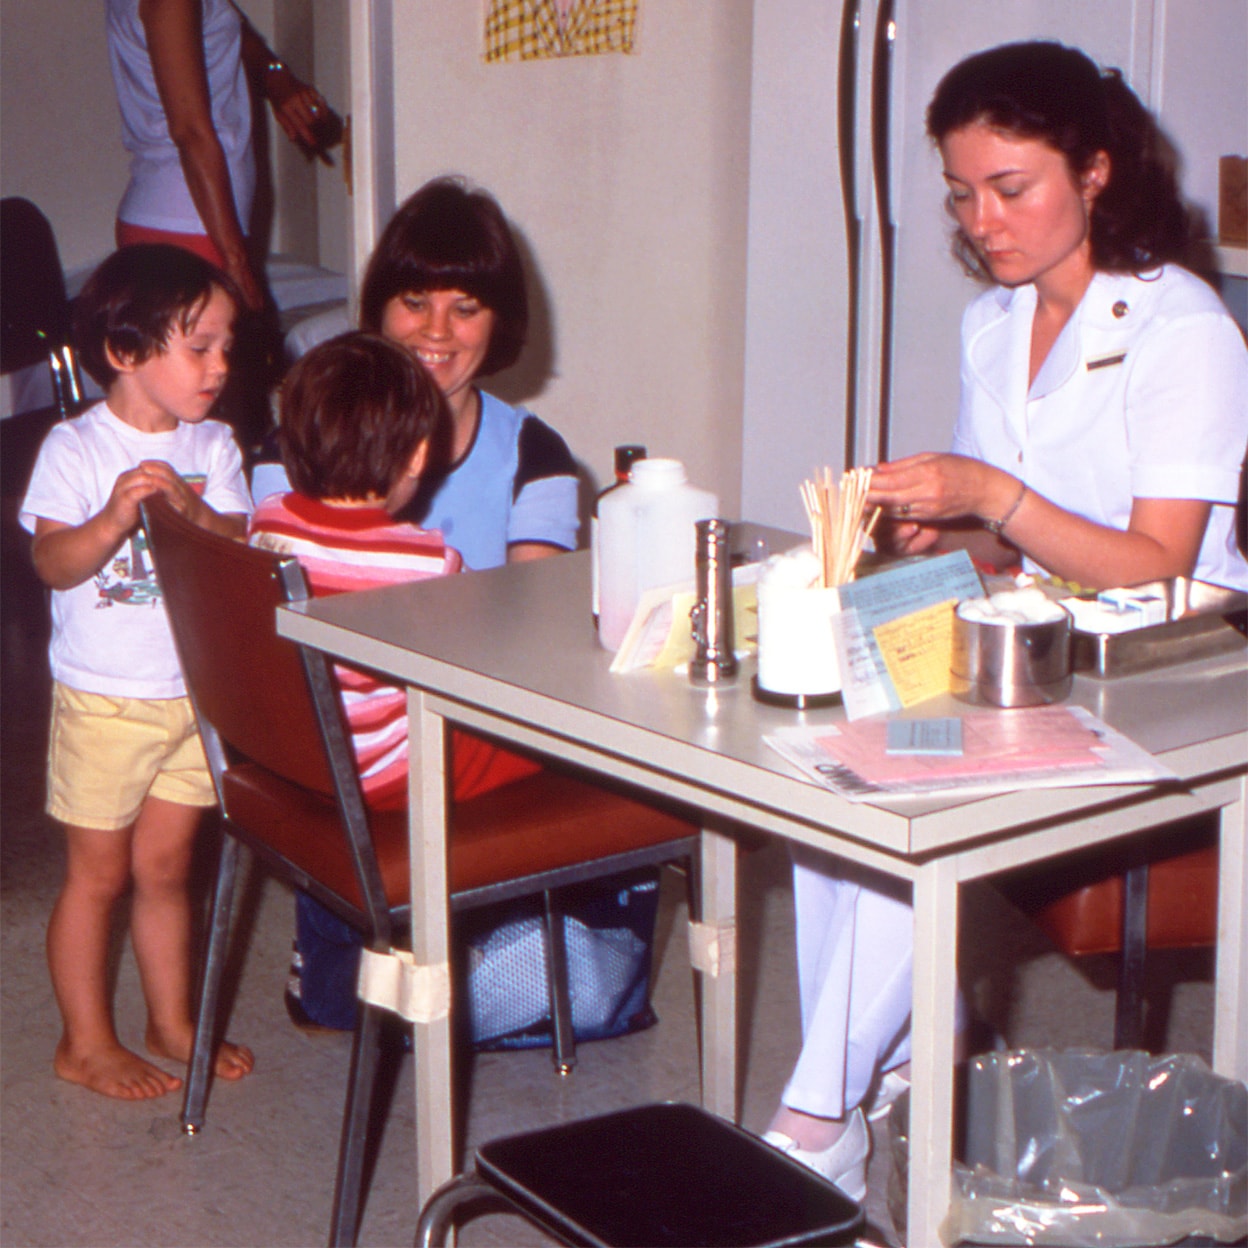 A mother waits with two children as another child prepares to get a vaccine from a nurse.